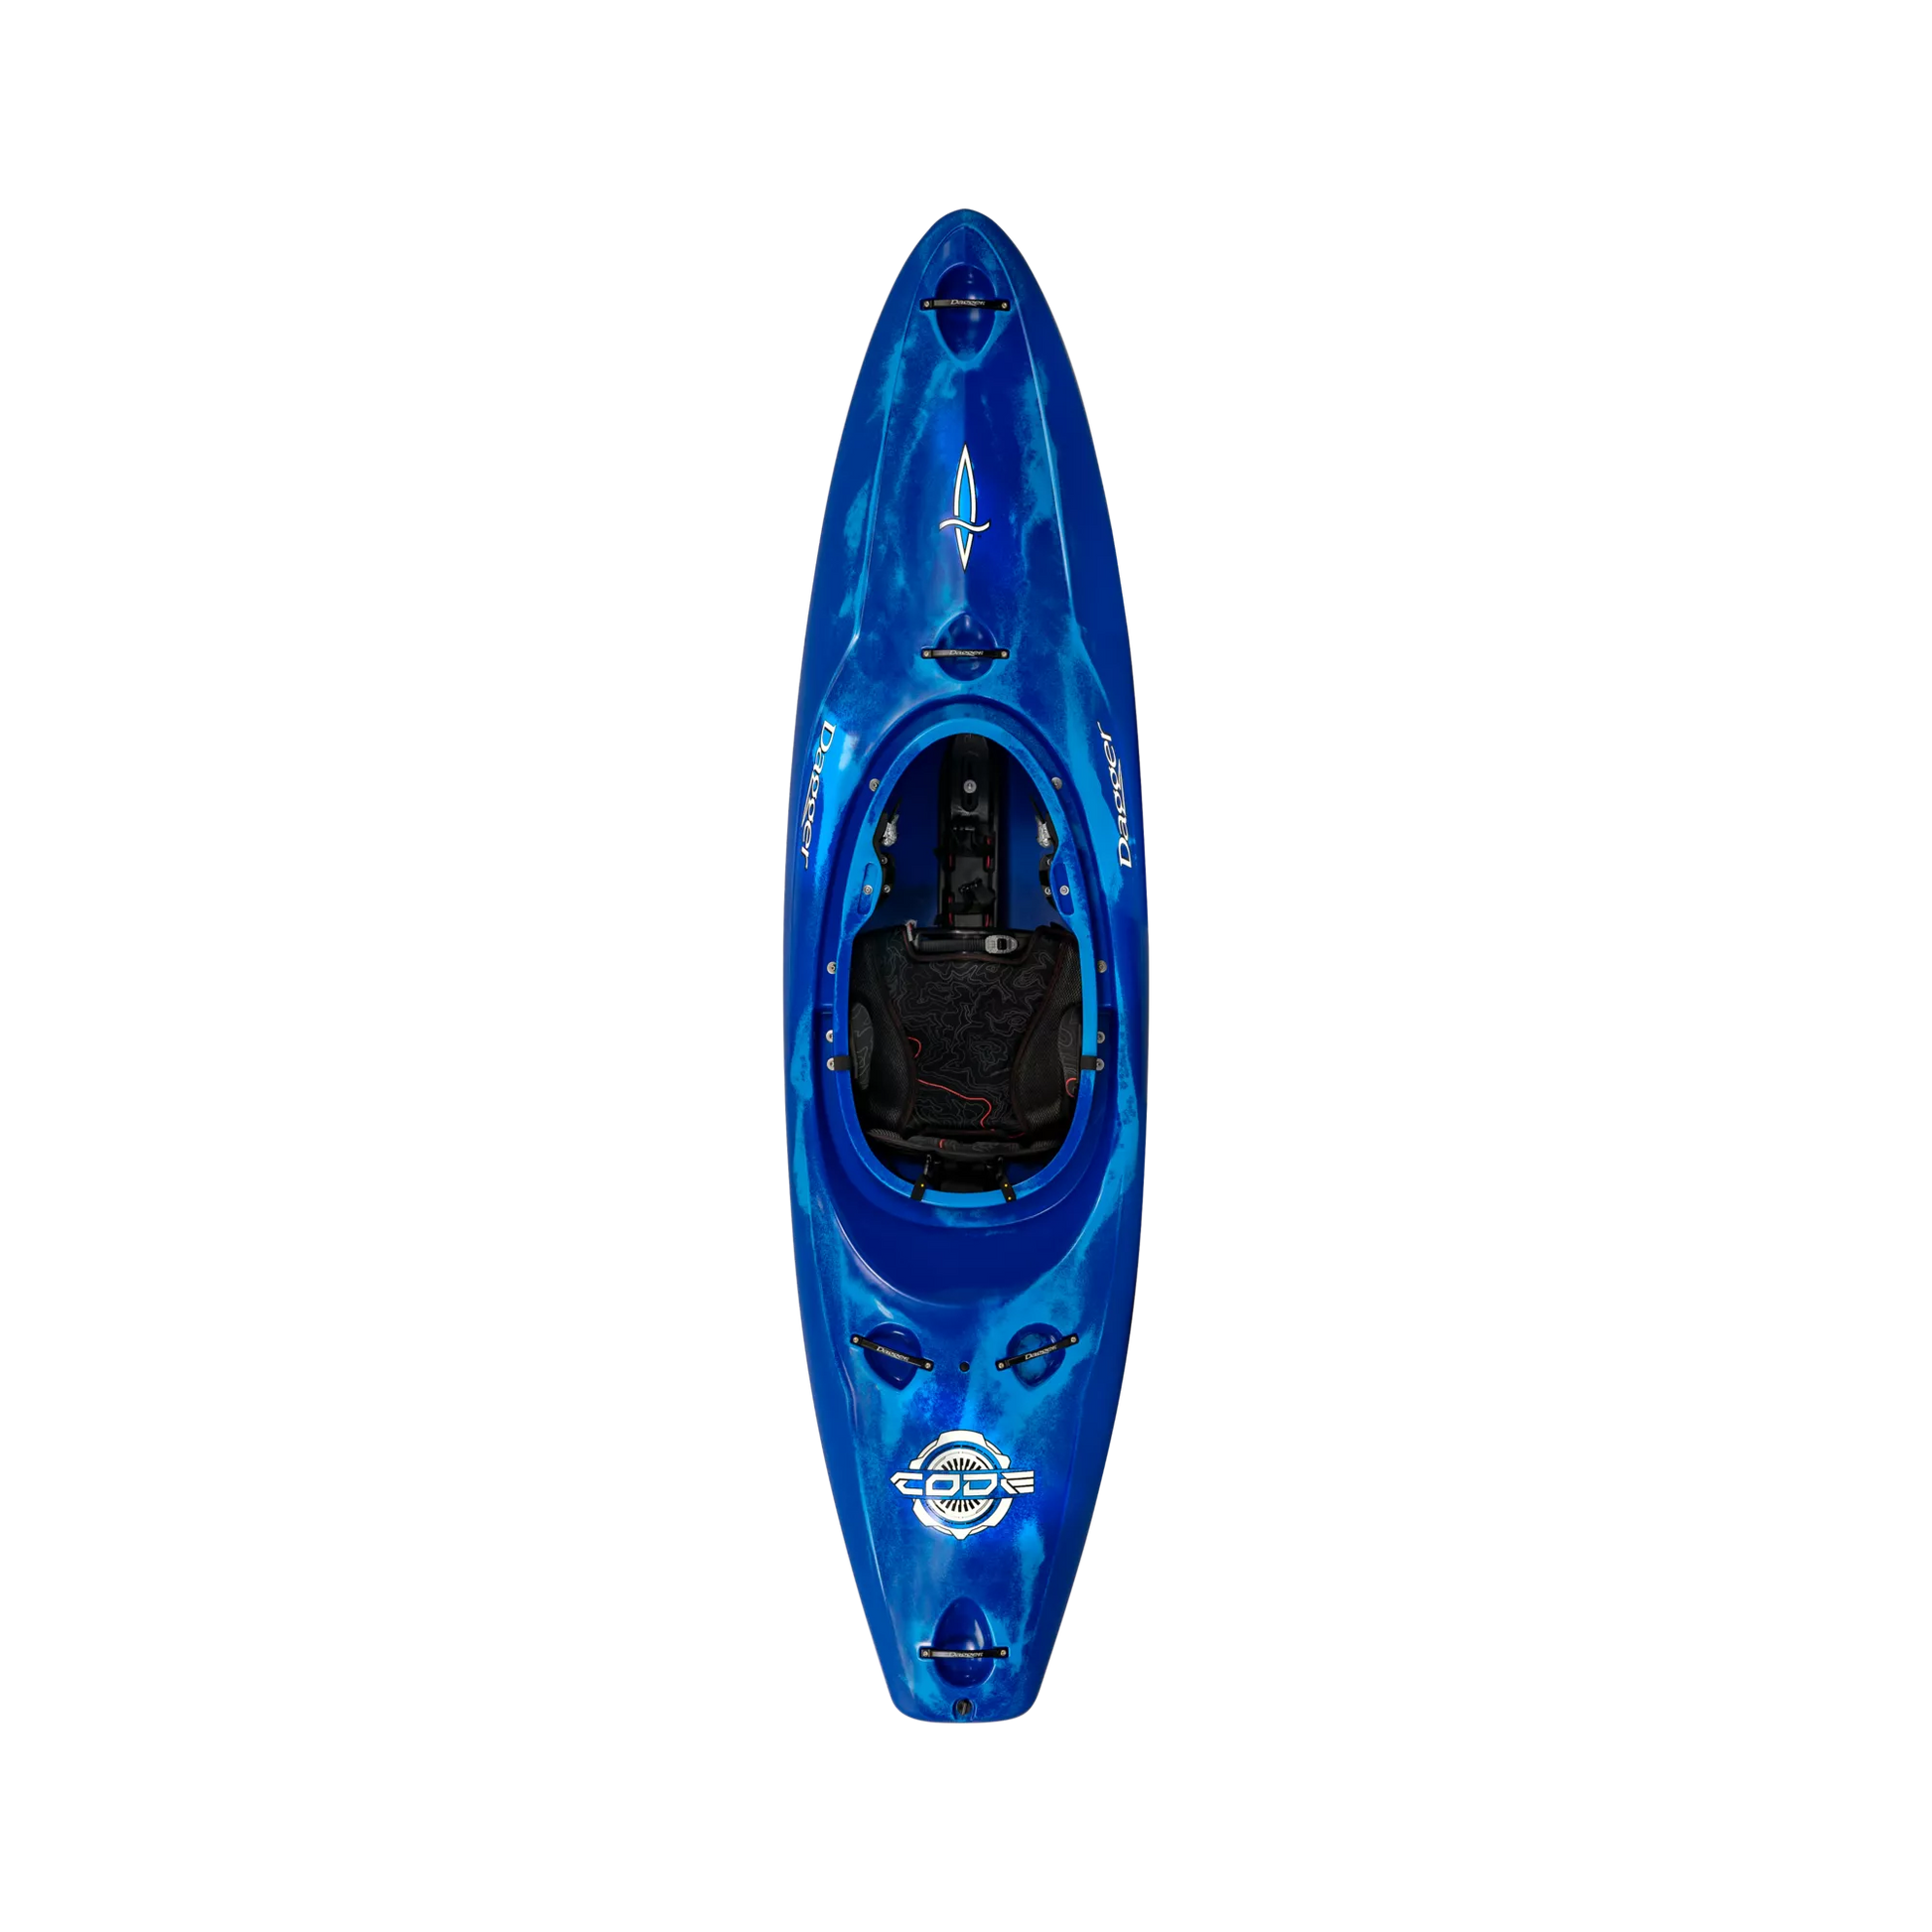 The Blue Smoke Dagger Code creek whitewater kayak with new thigh brace system.